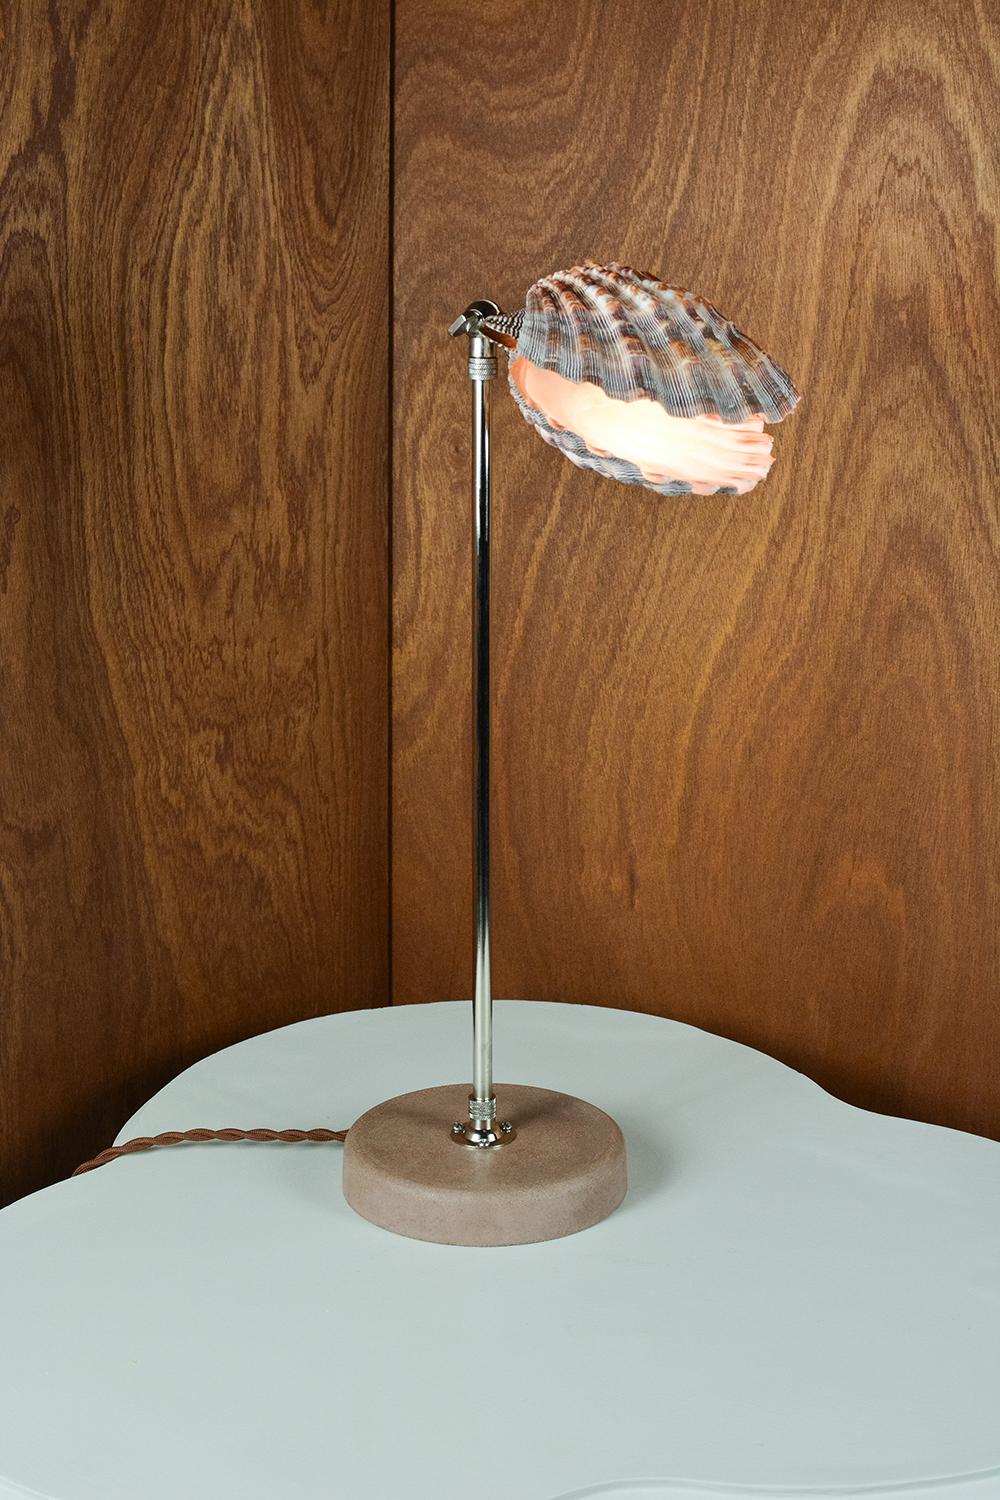 'Lavender Lion's Paw' Table Lamp in Nickel with Natural Scallop Shell Shade For Sale 4